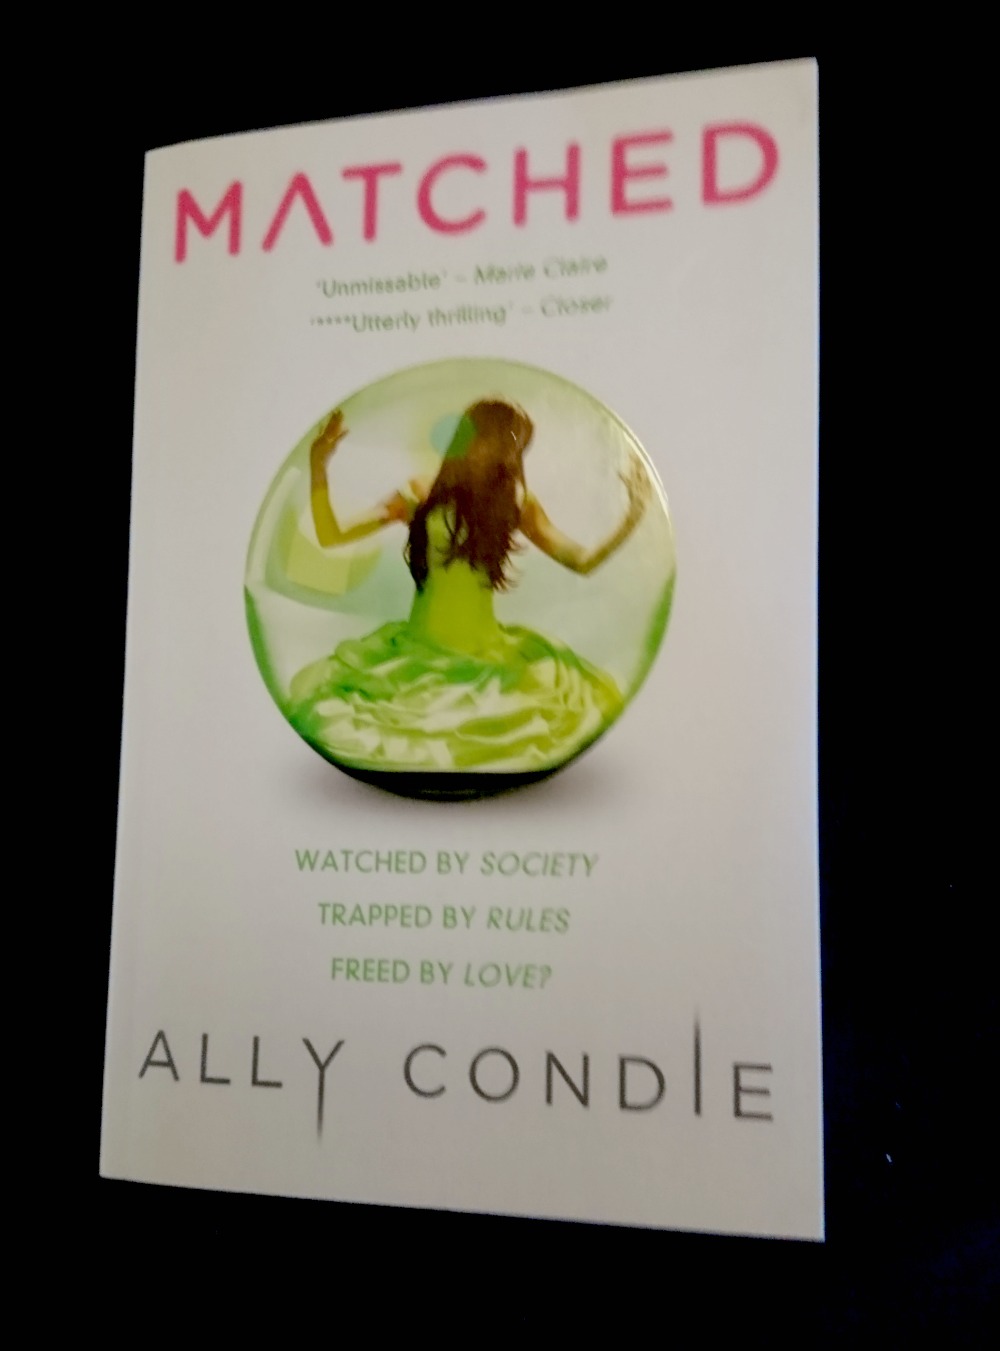 Matched by Ally Condie book cover